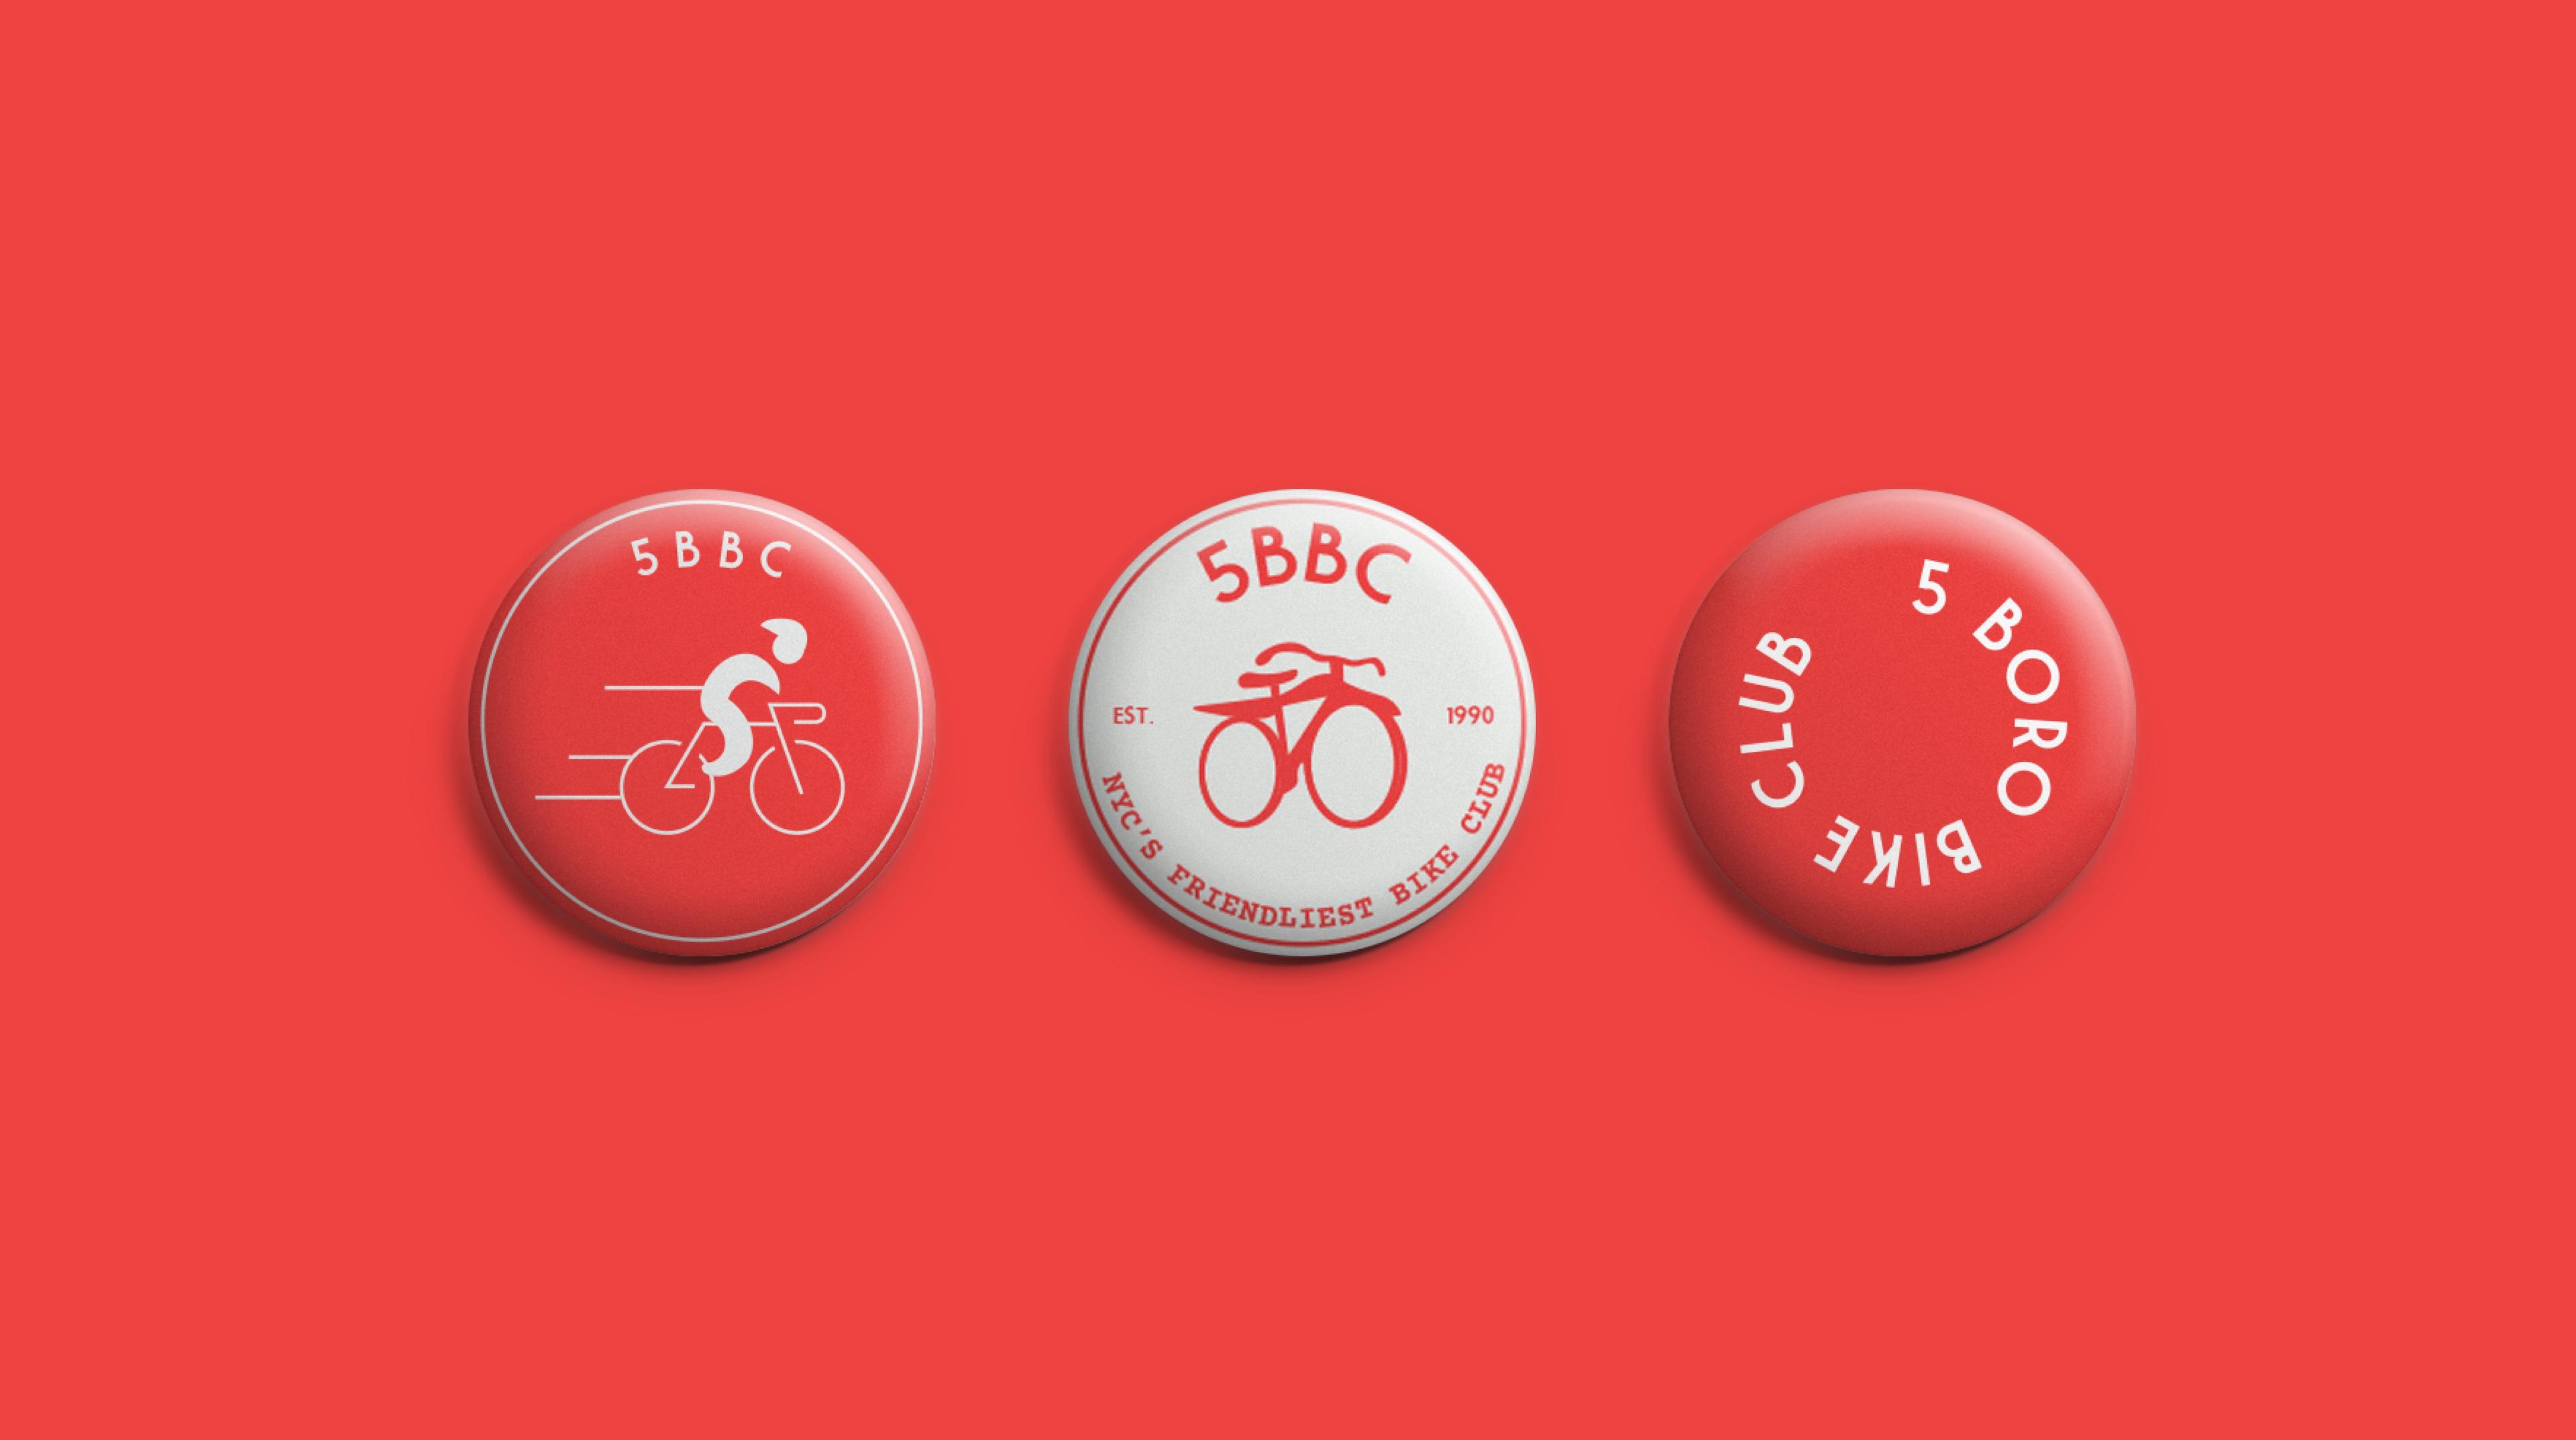 5BBC branding and illustrations on red and white badges